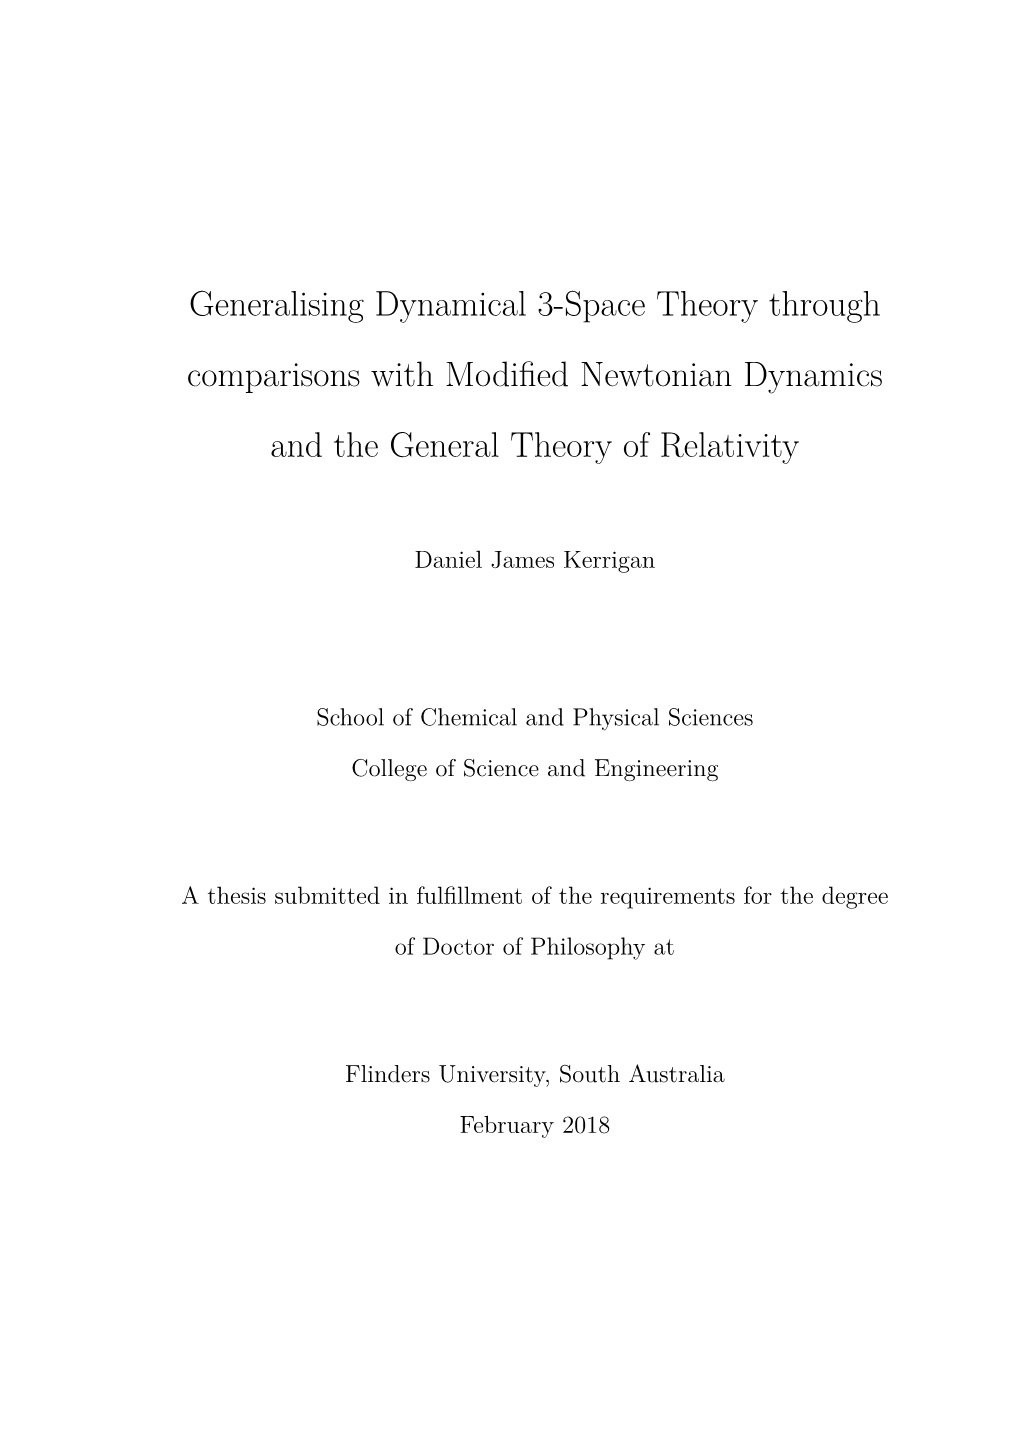 Generalising Dynamical 3-Space Theory Through Comparisons with Modiﬁed Newtonian Dynamics and the General Theory of Relativity